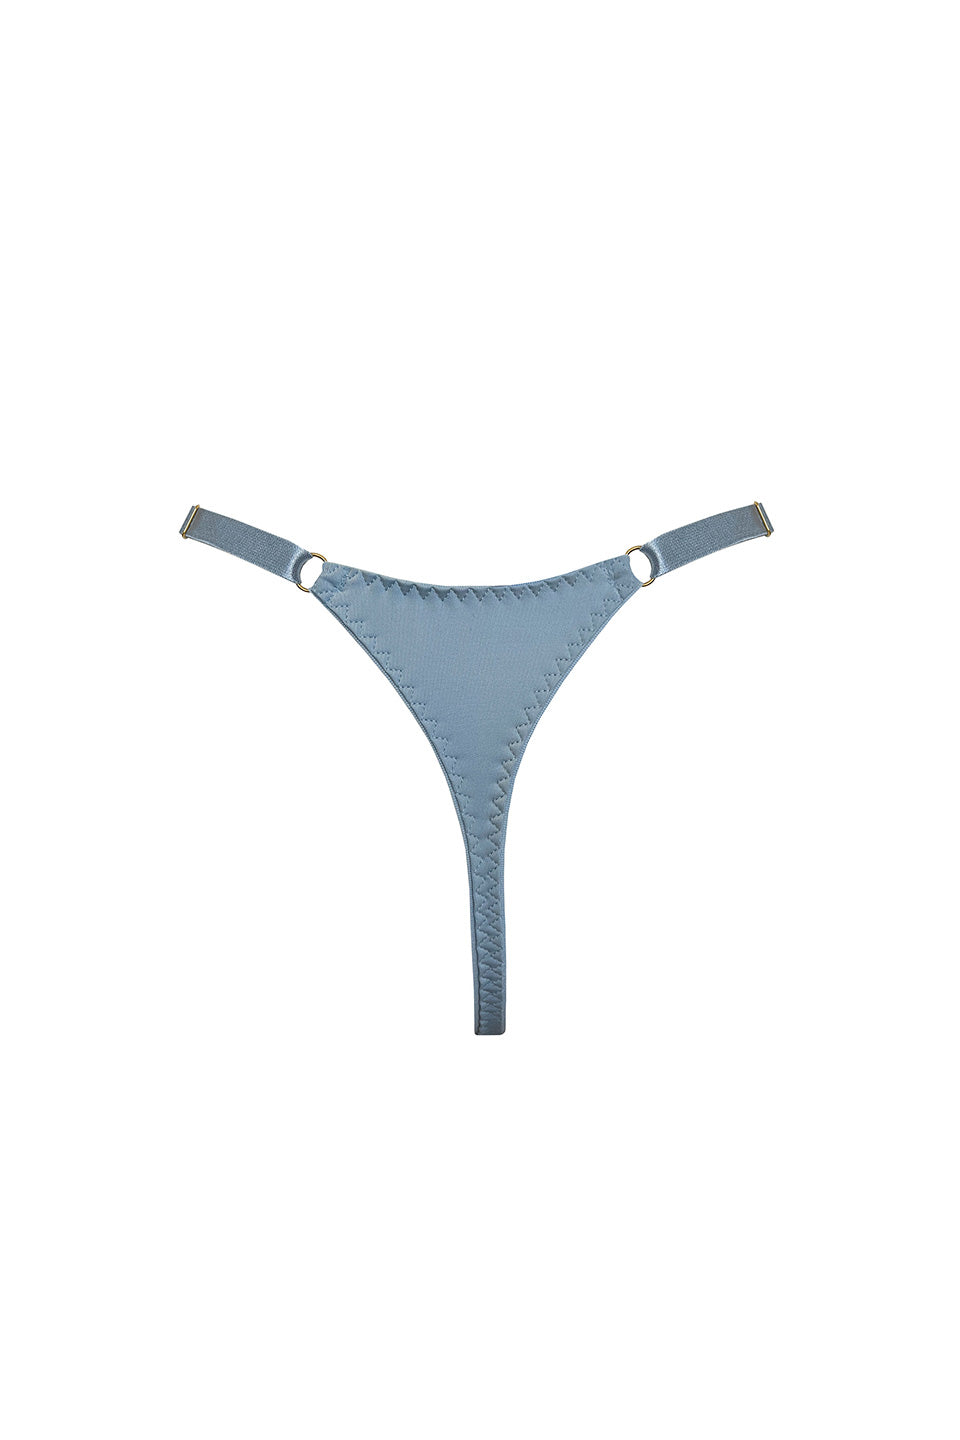 Thumbnail for Product gallery 2, Vero High Leg Thong Dusty Blue